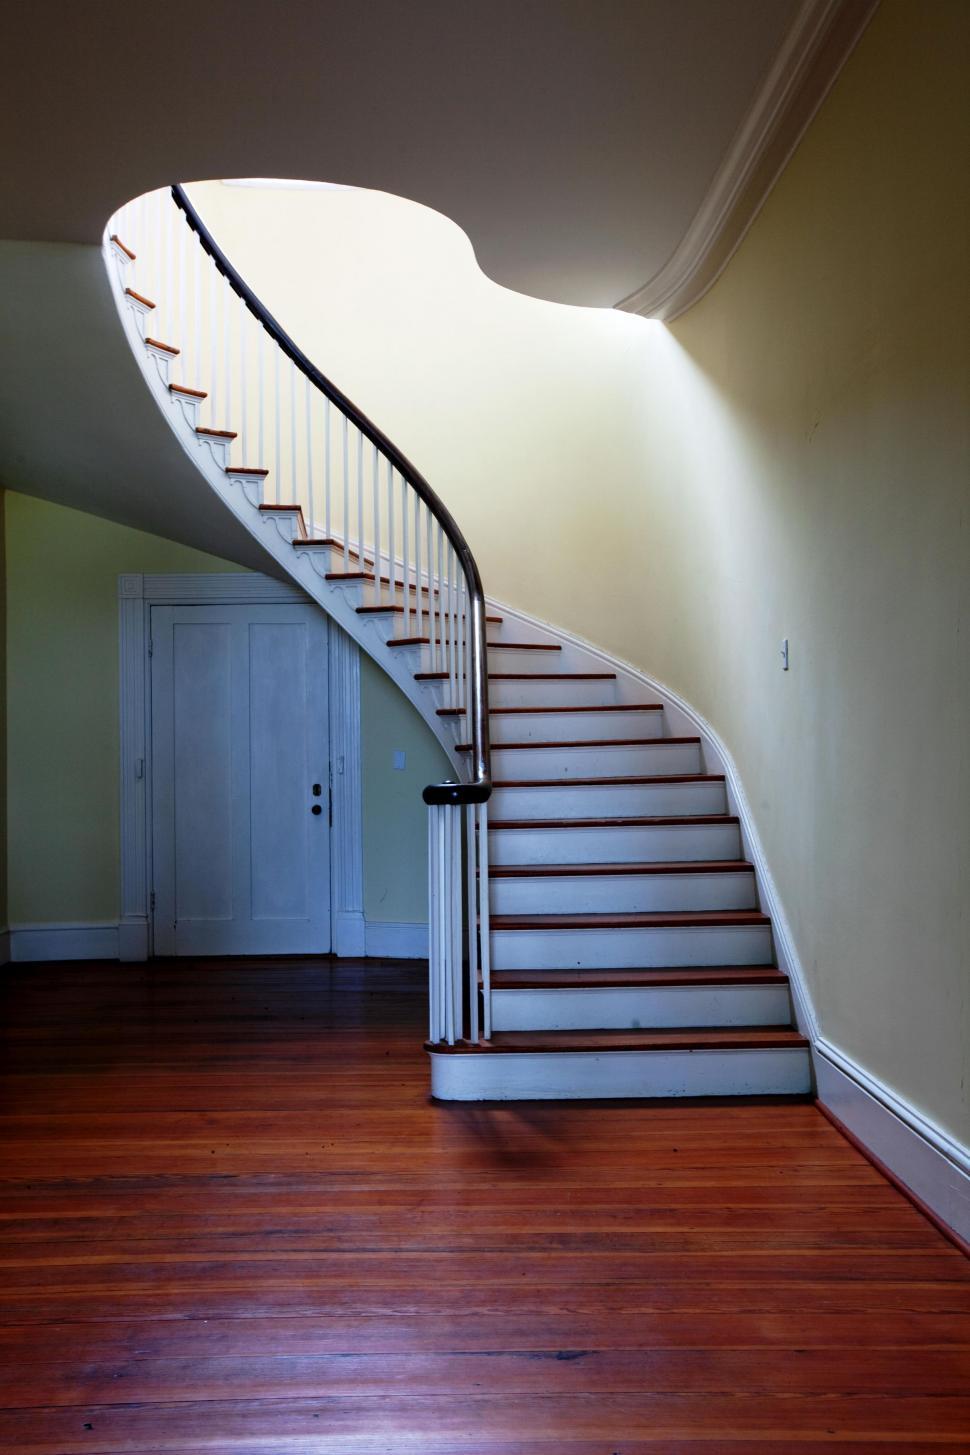 Free Image of Staircase - No people  